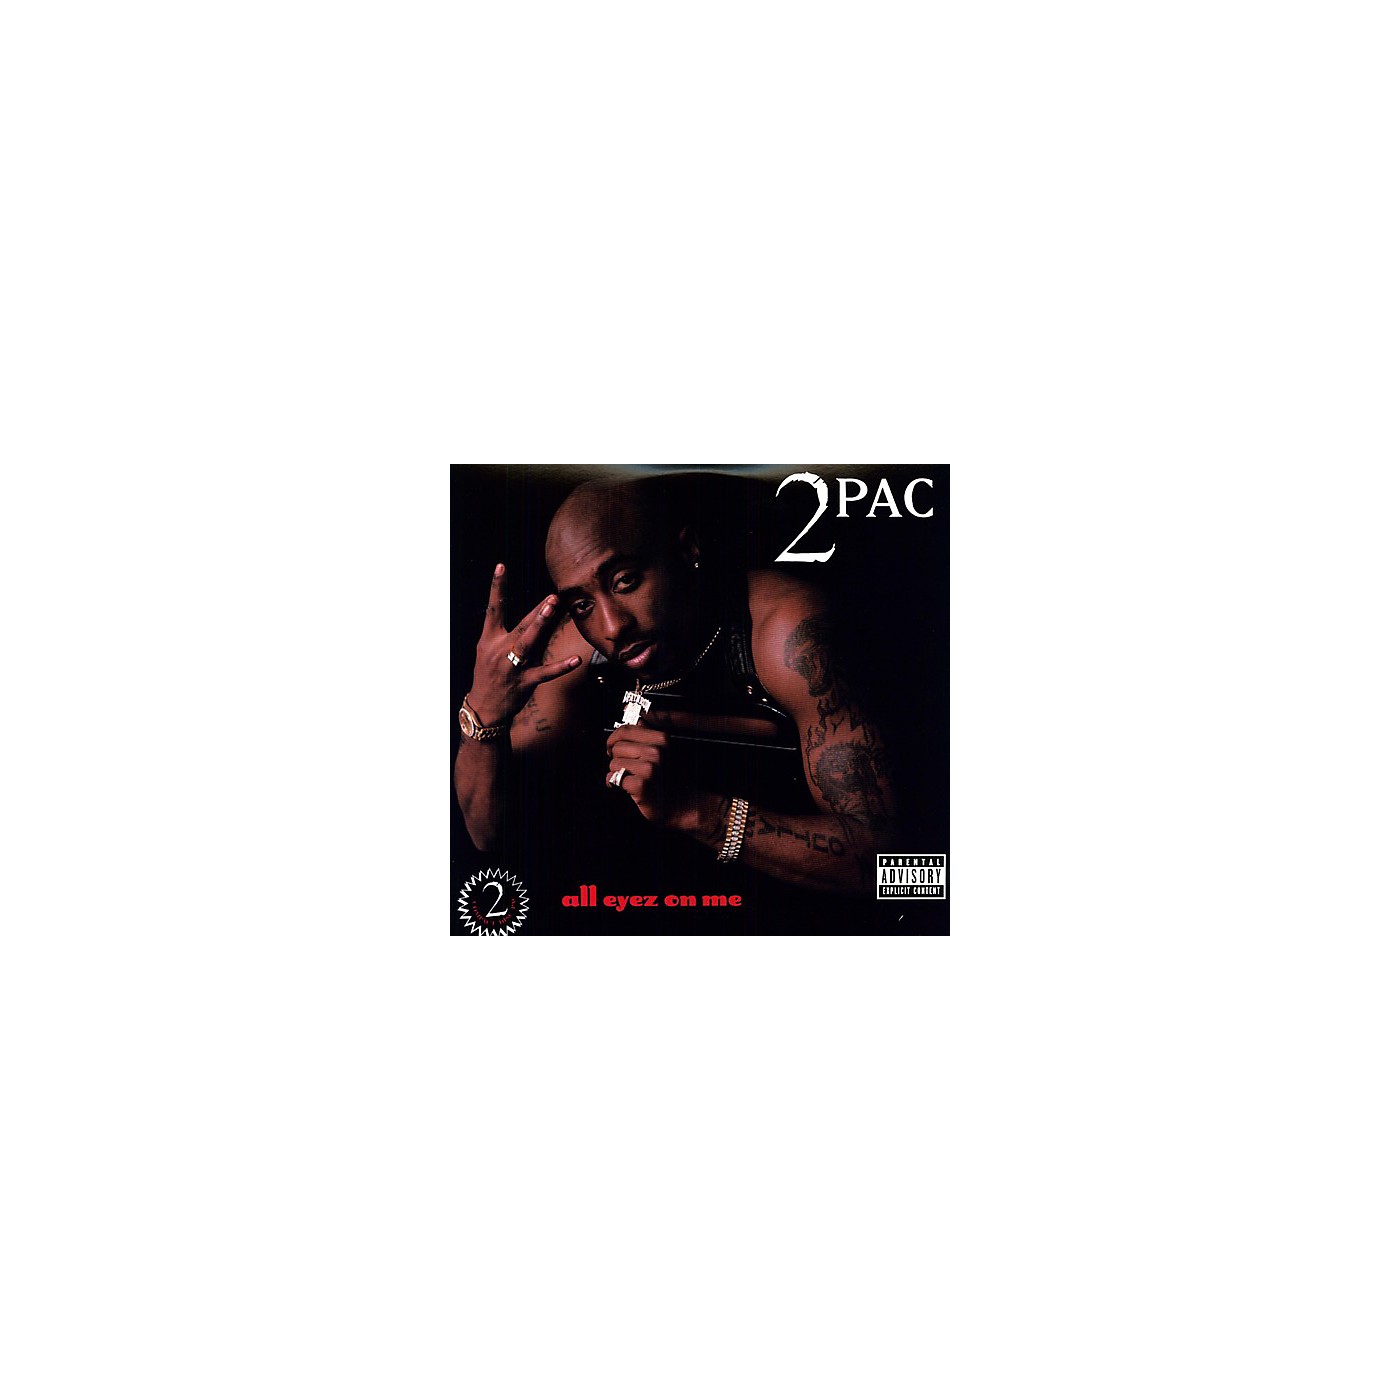 2pac all eyez on me album download free